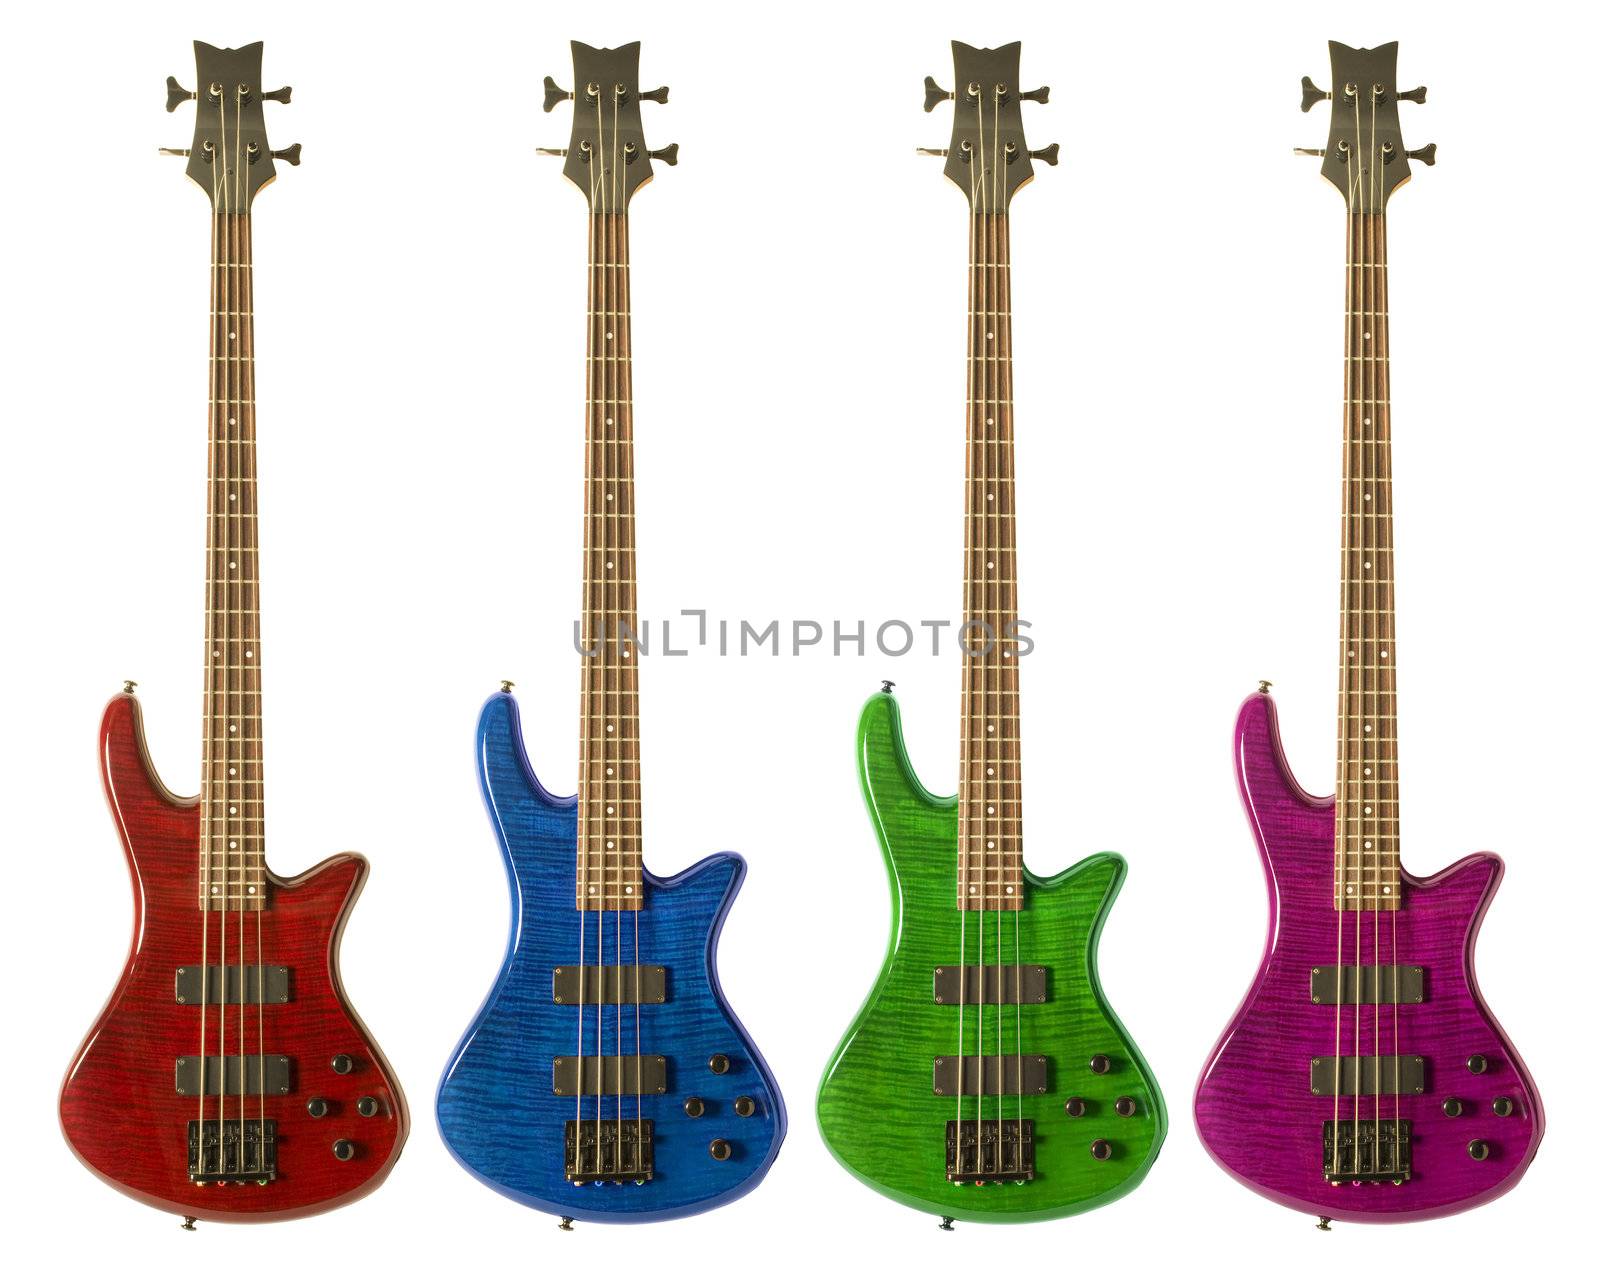 Multi-colored bass guitars against white background